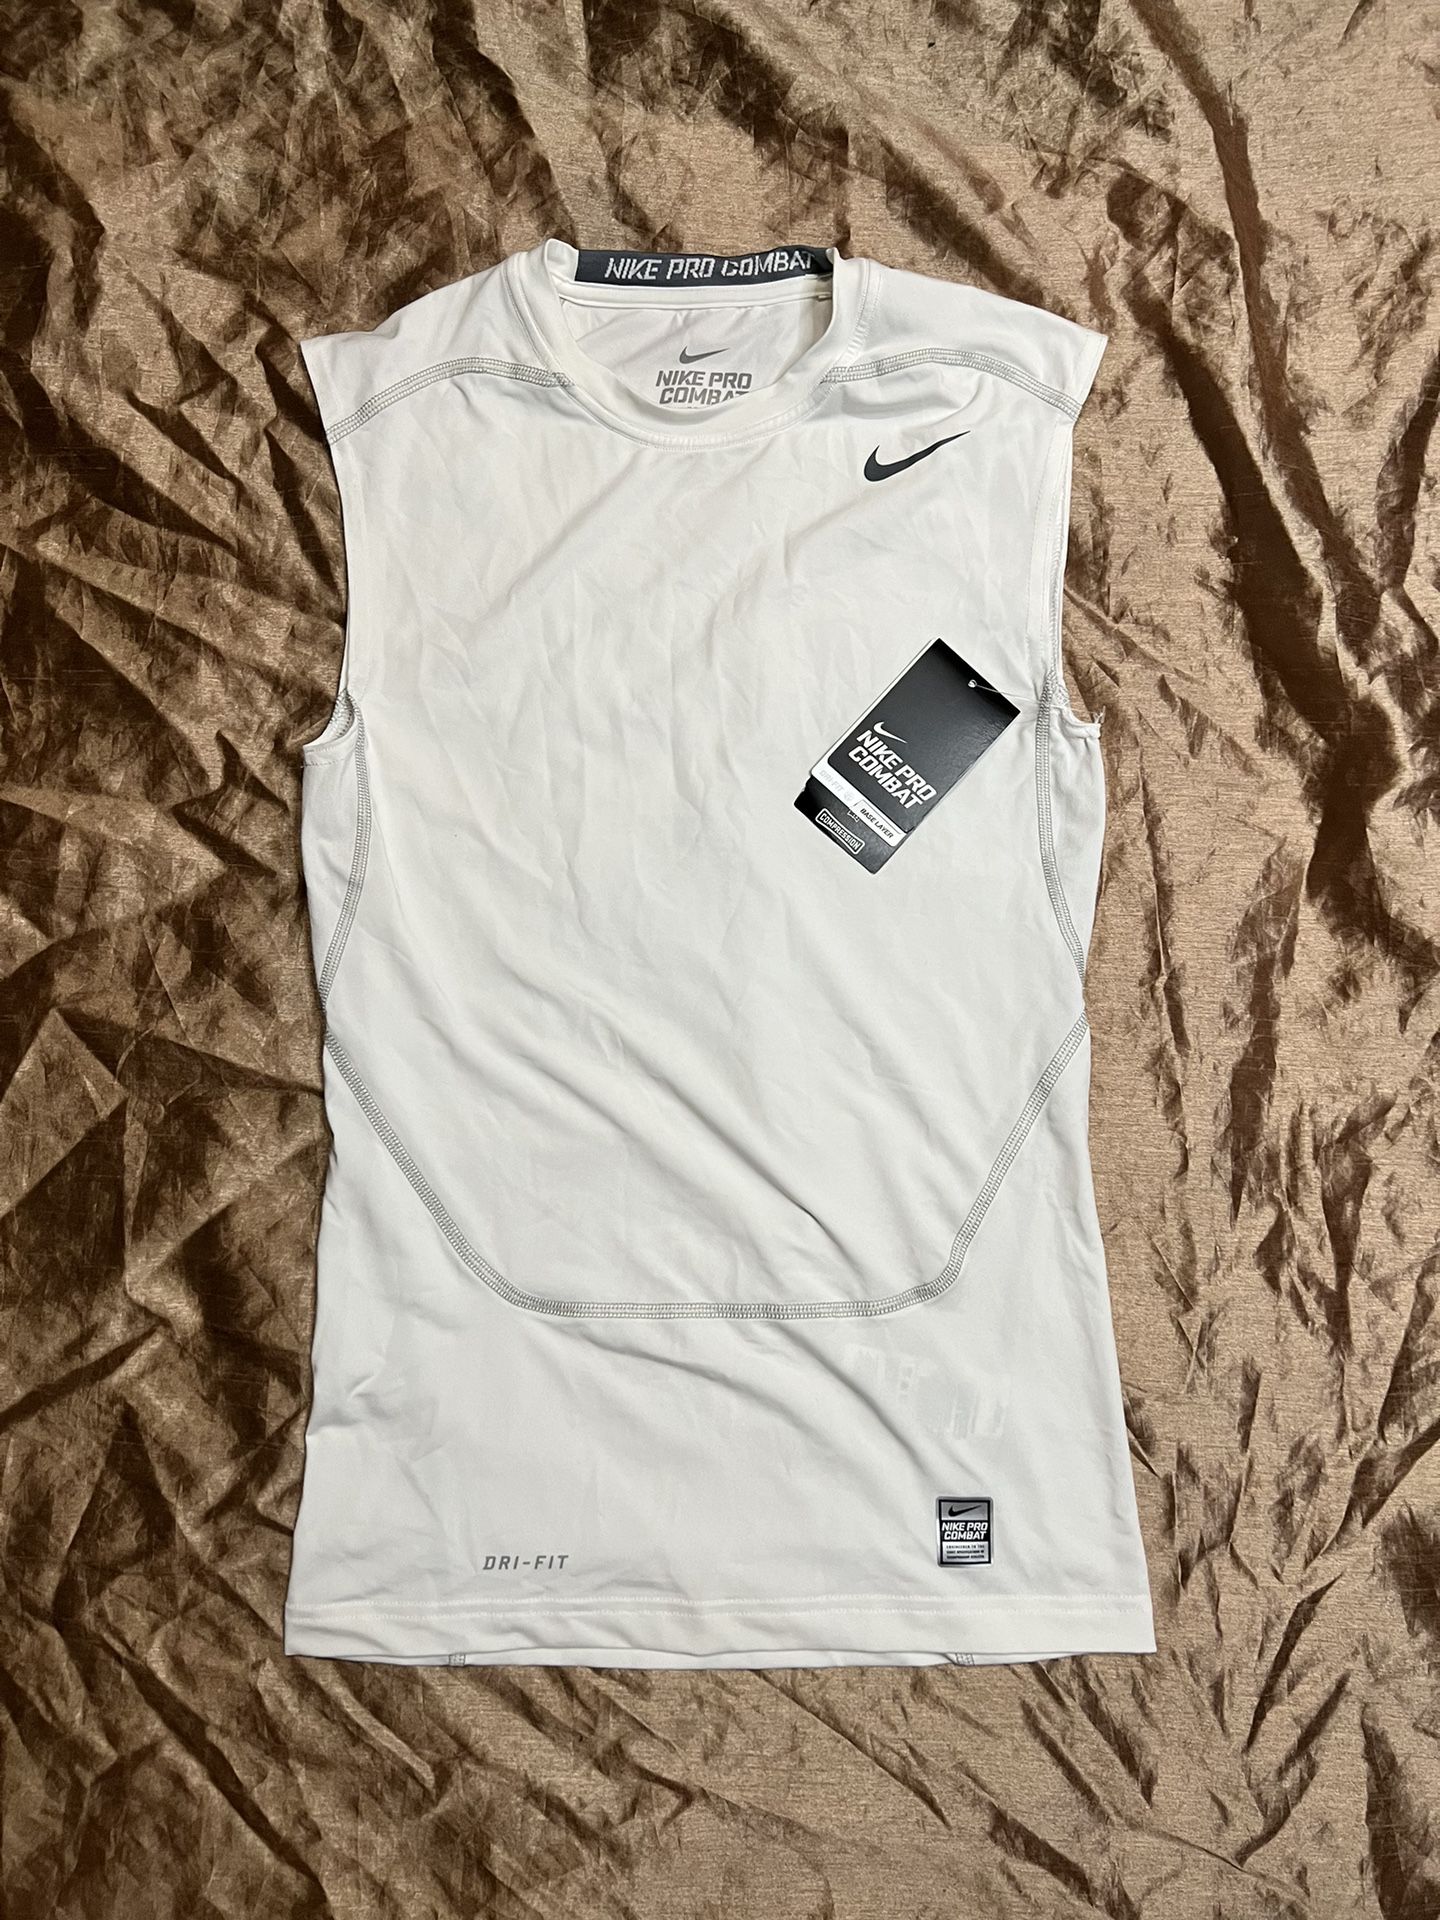 Medium NEW Nike Pro Combat Compression white sleeveless fitted shi Sale in Artesia, CA - OfferUp